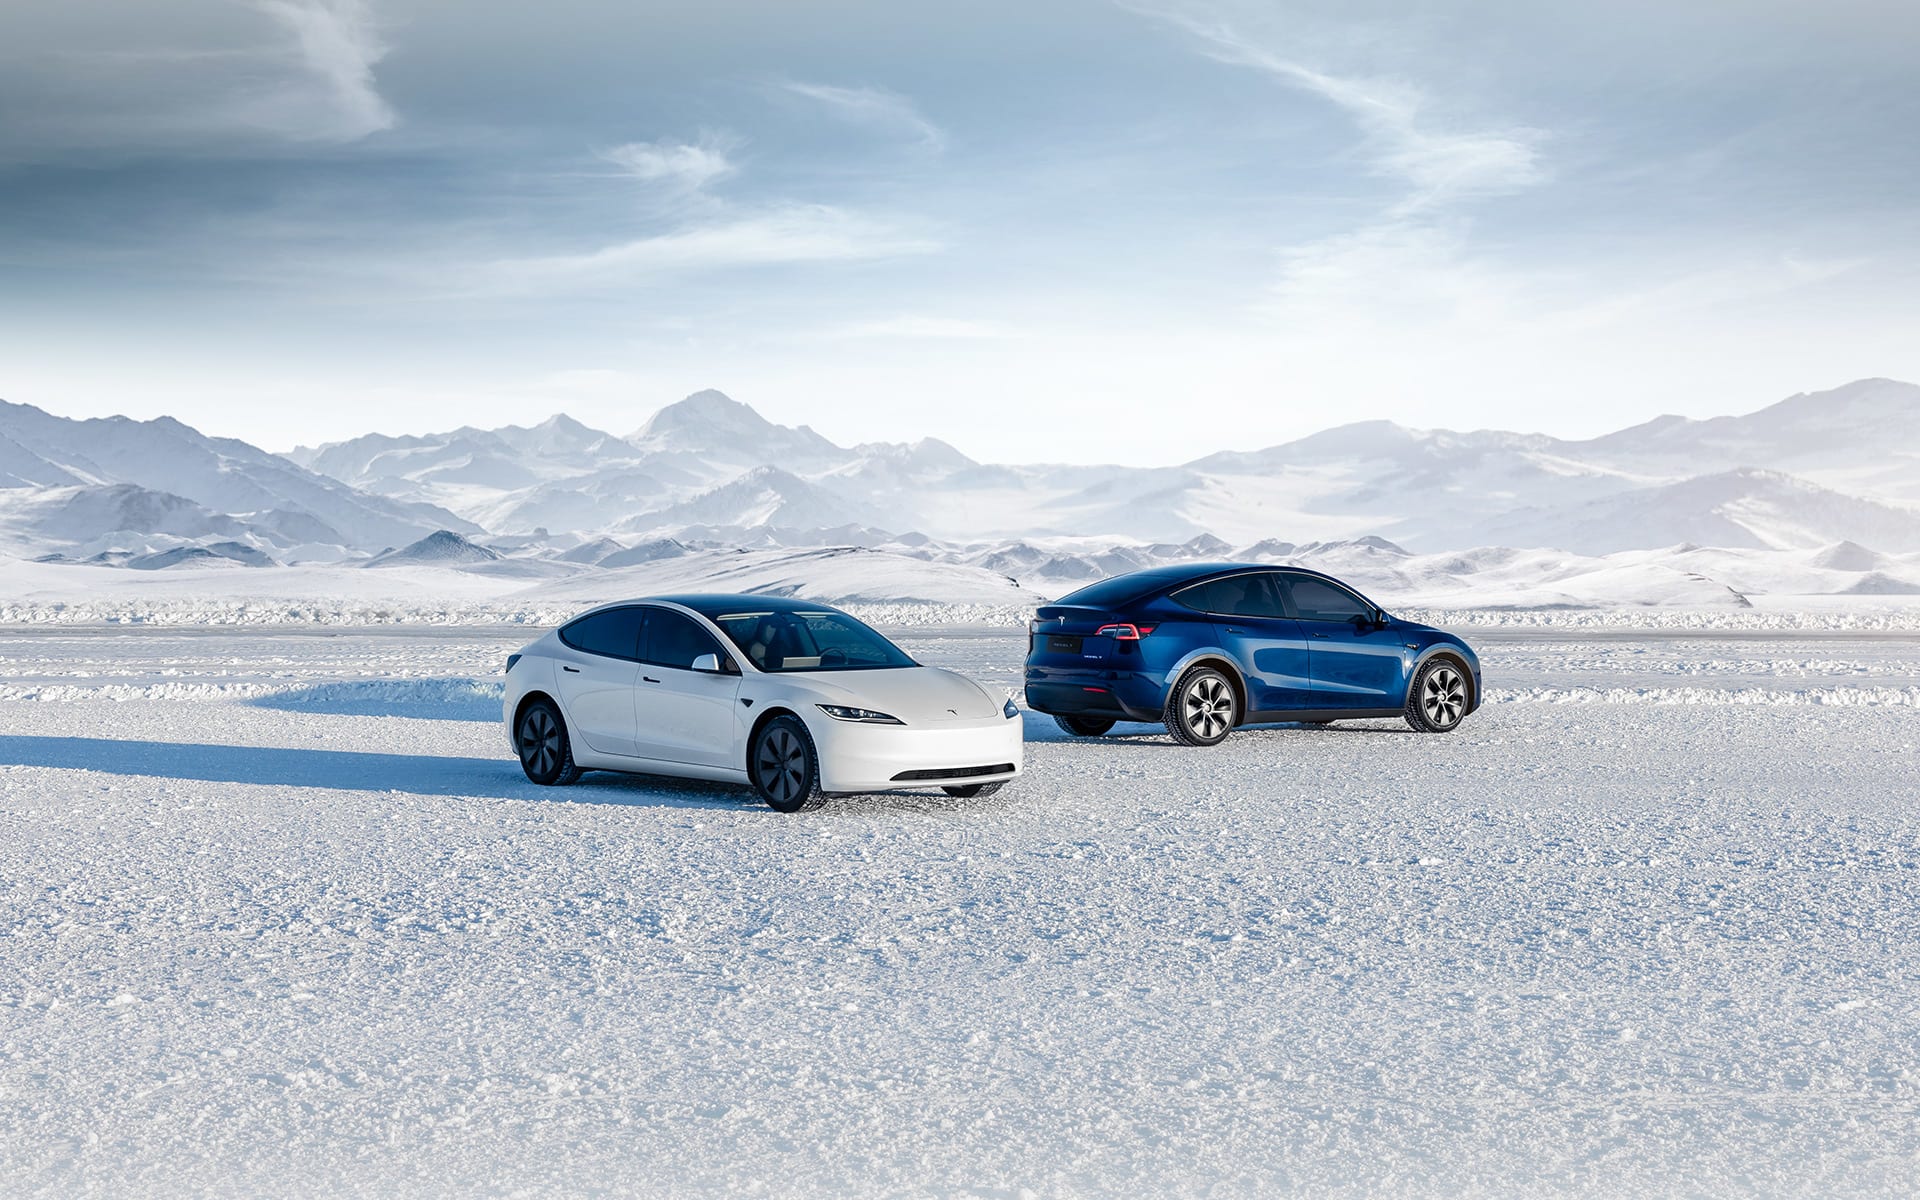 A white Model 3 and a blue Model Y parked on a snowy plain in front of snow-covered mountains